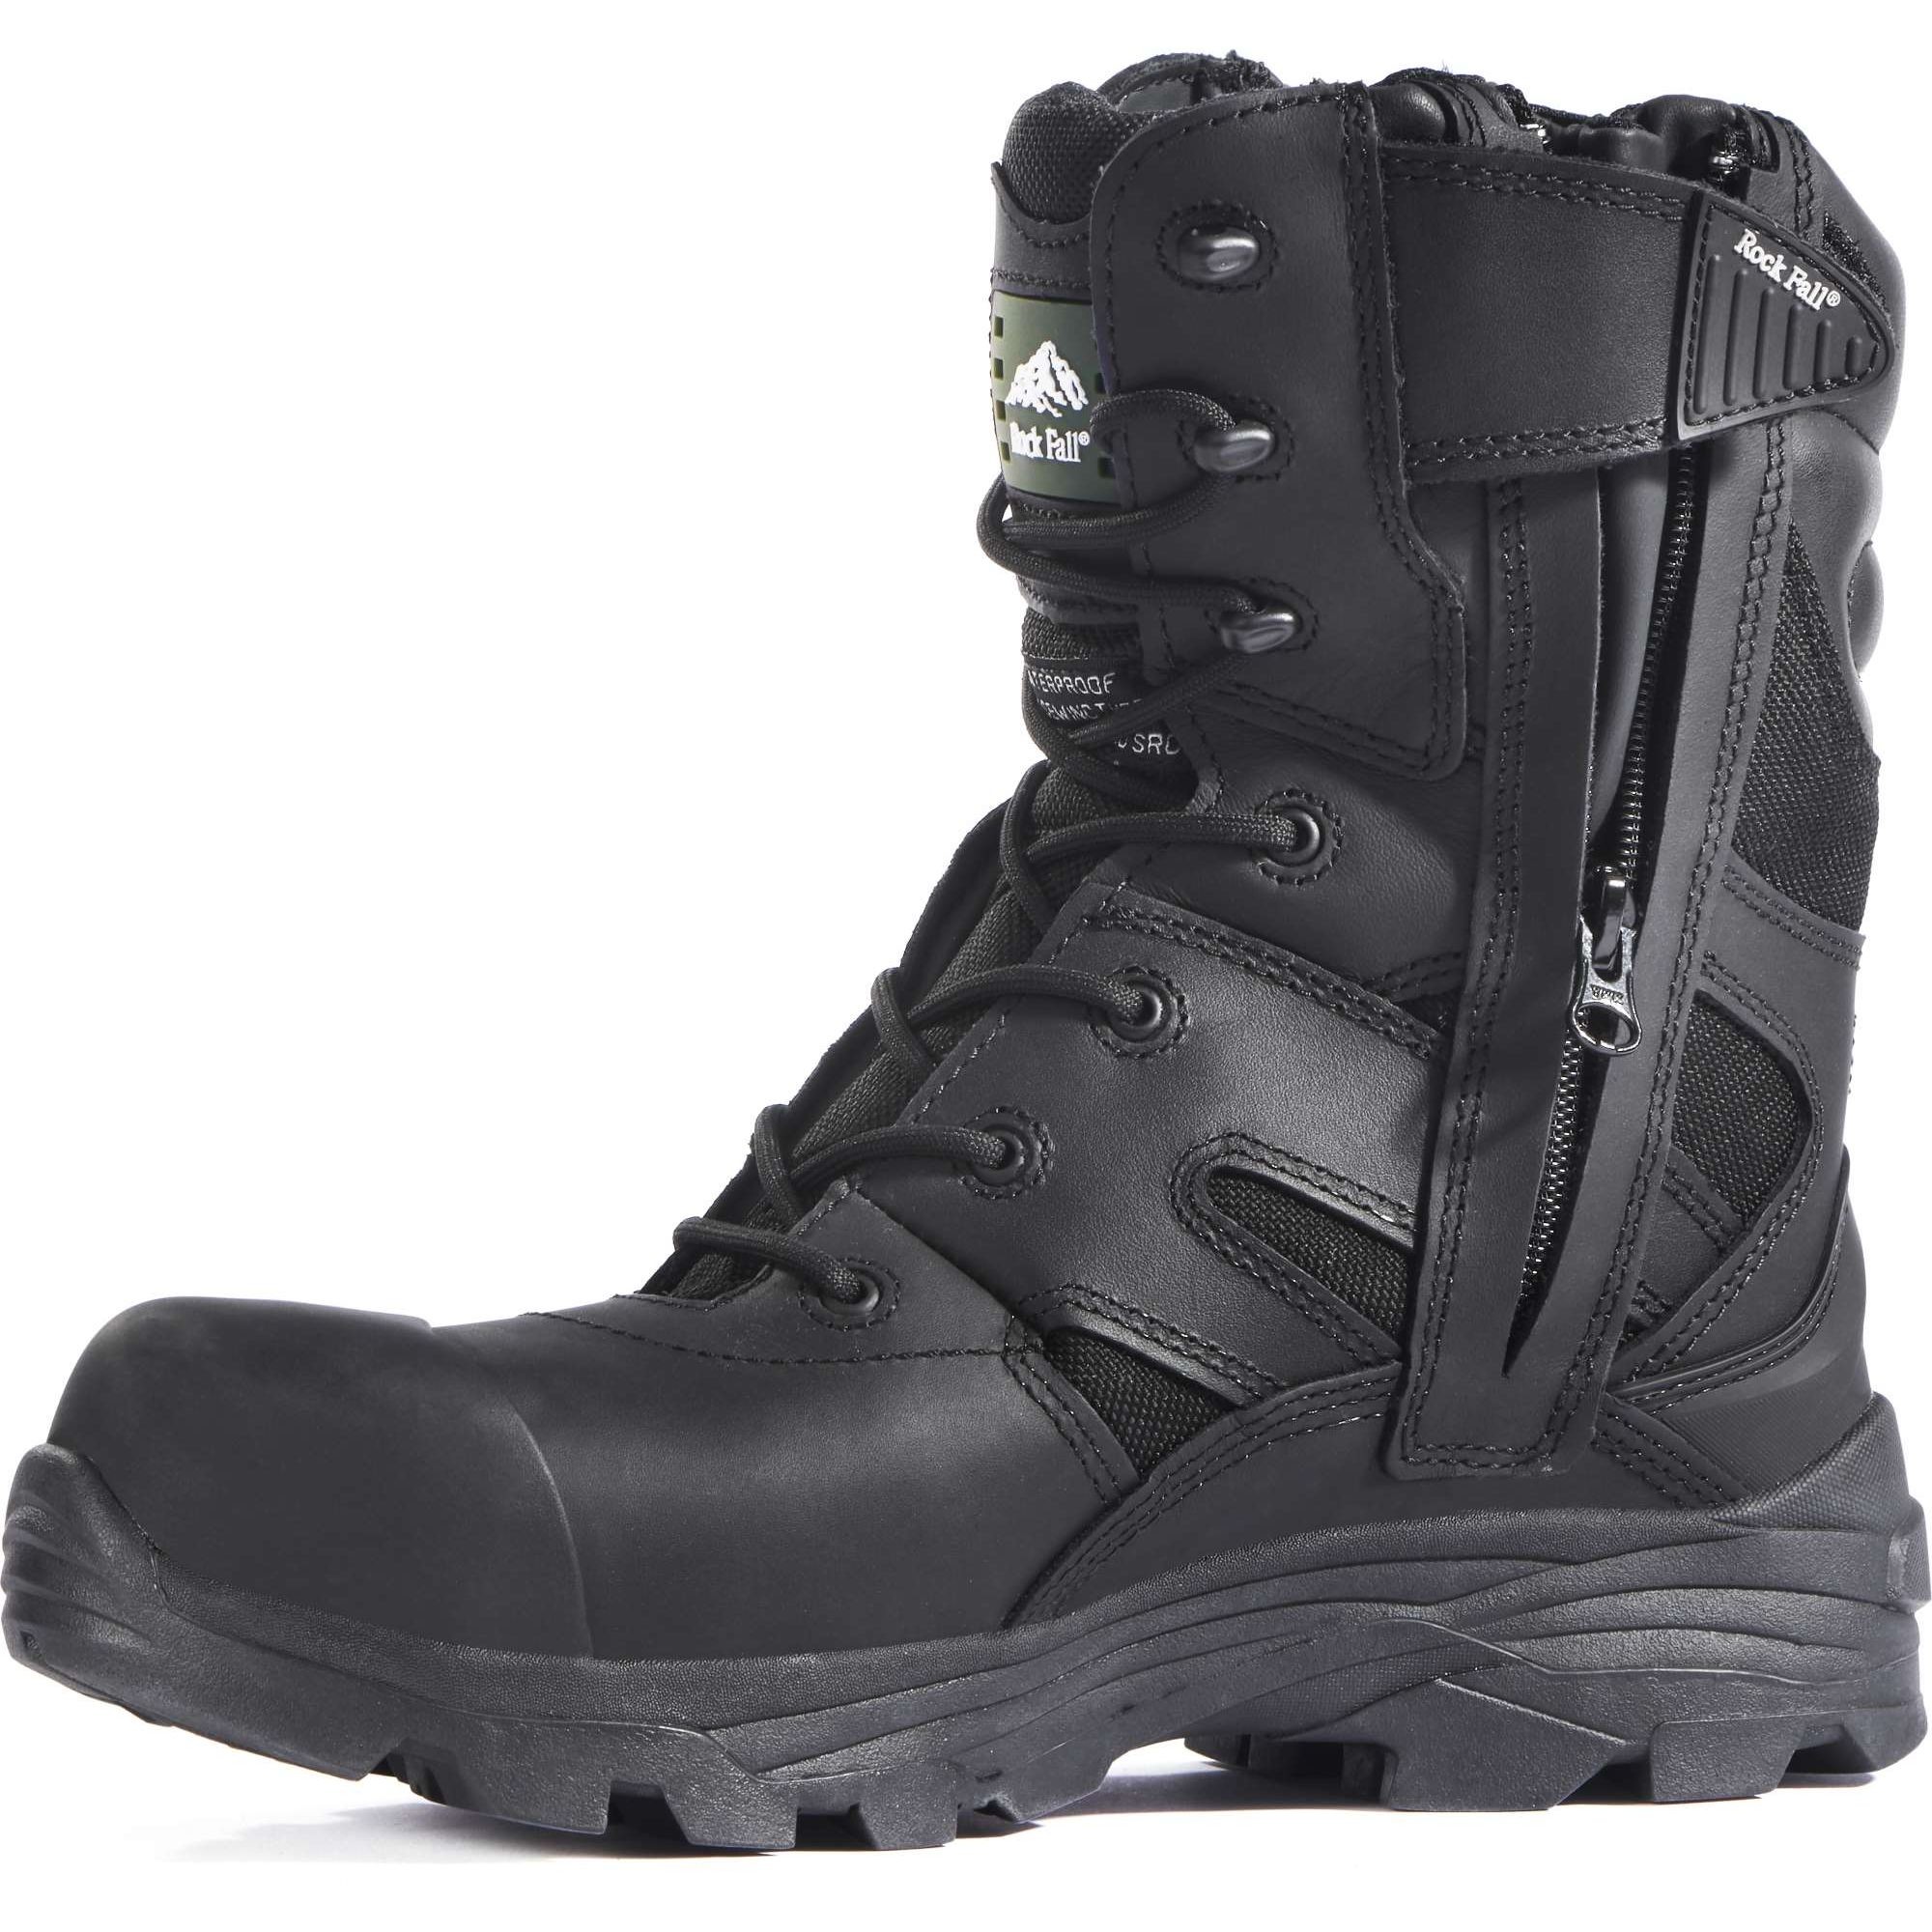 Rock Fall Titanium S3 Waterproof Safety Boots